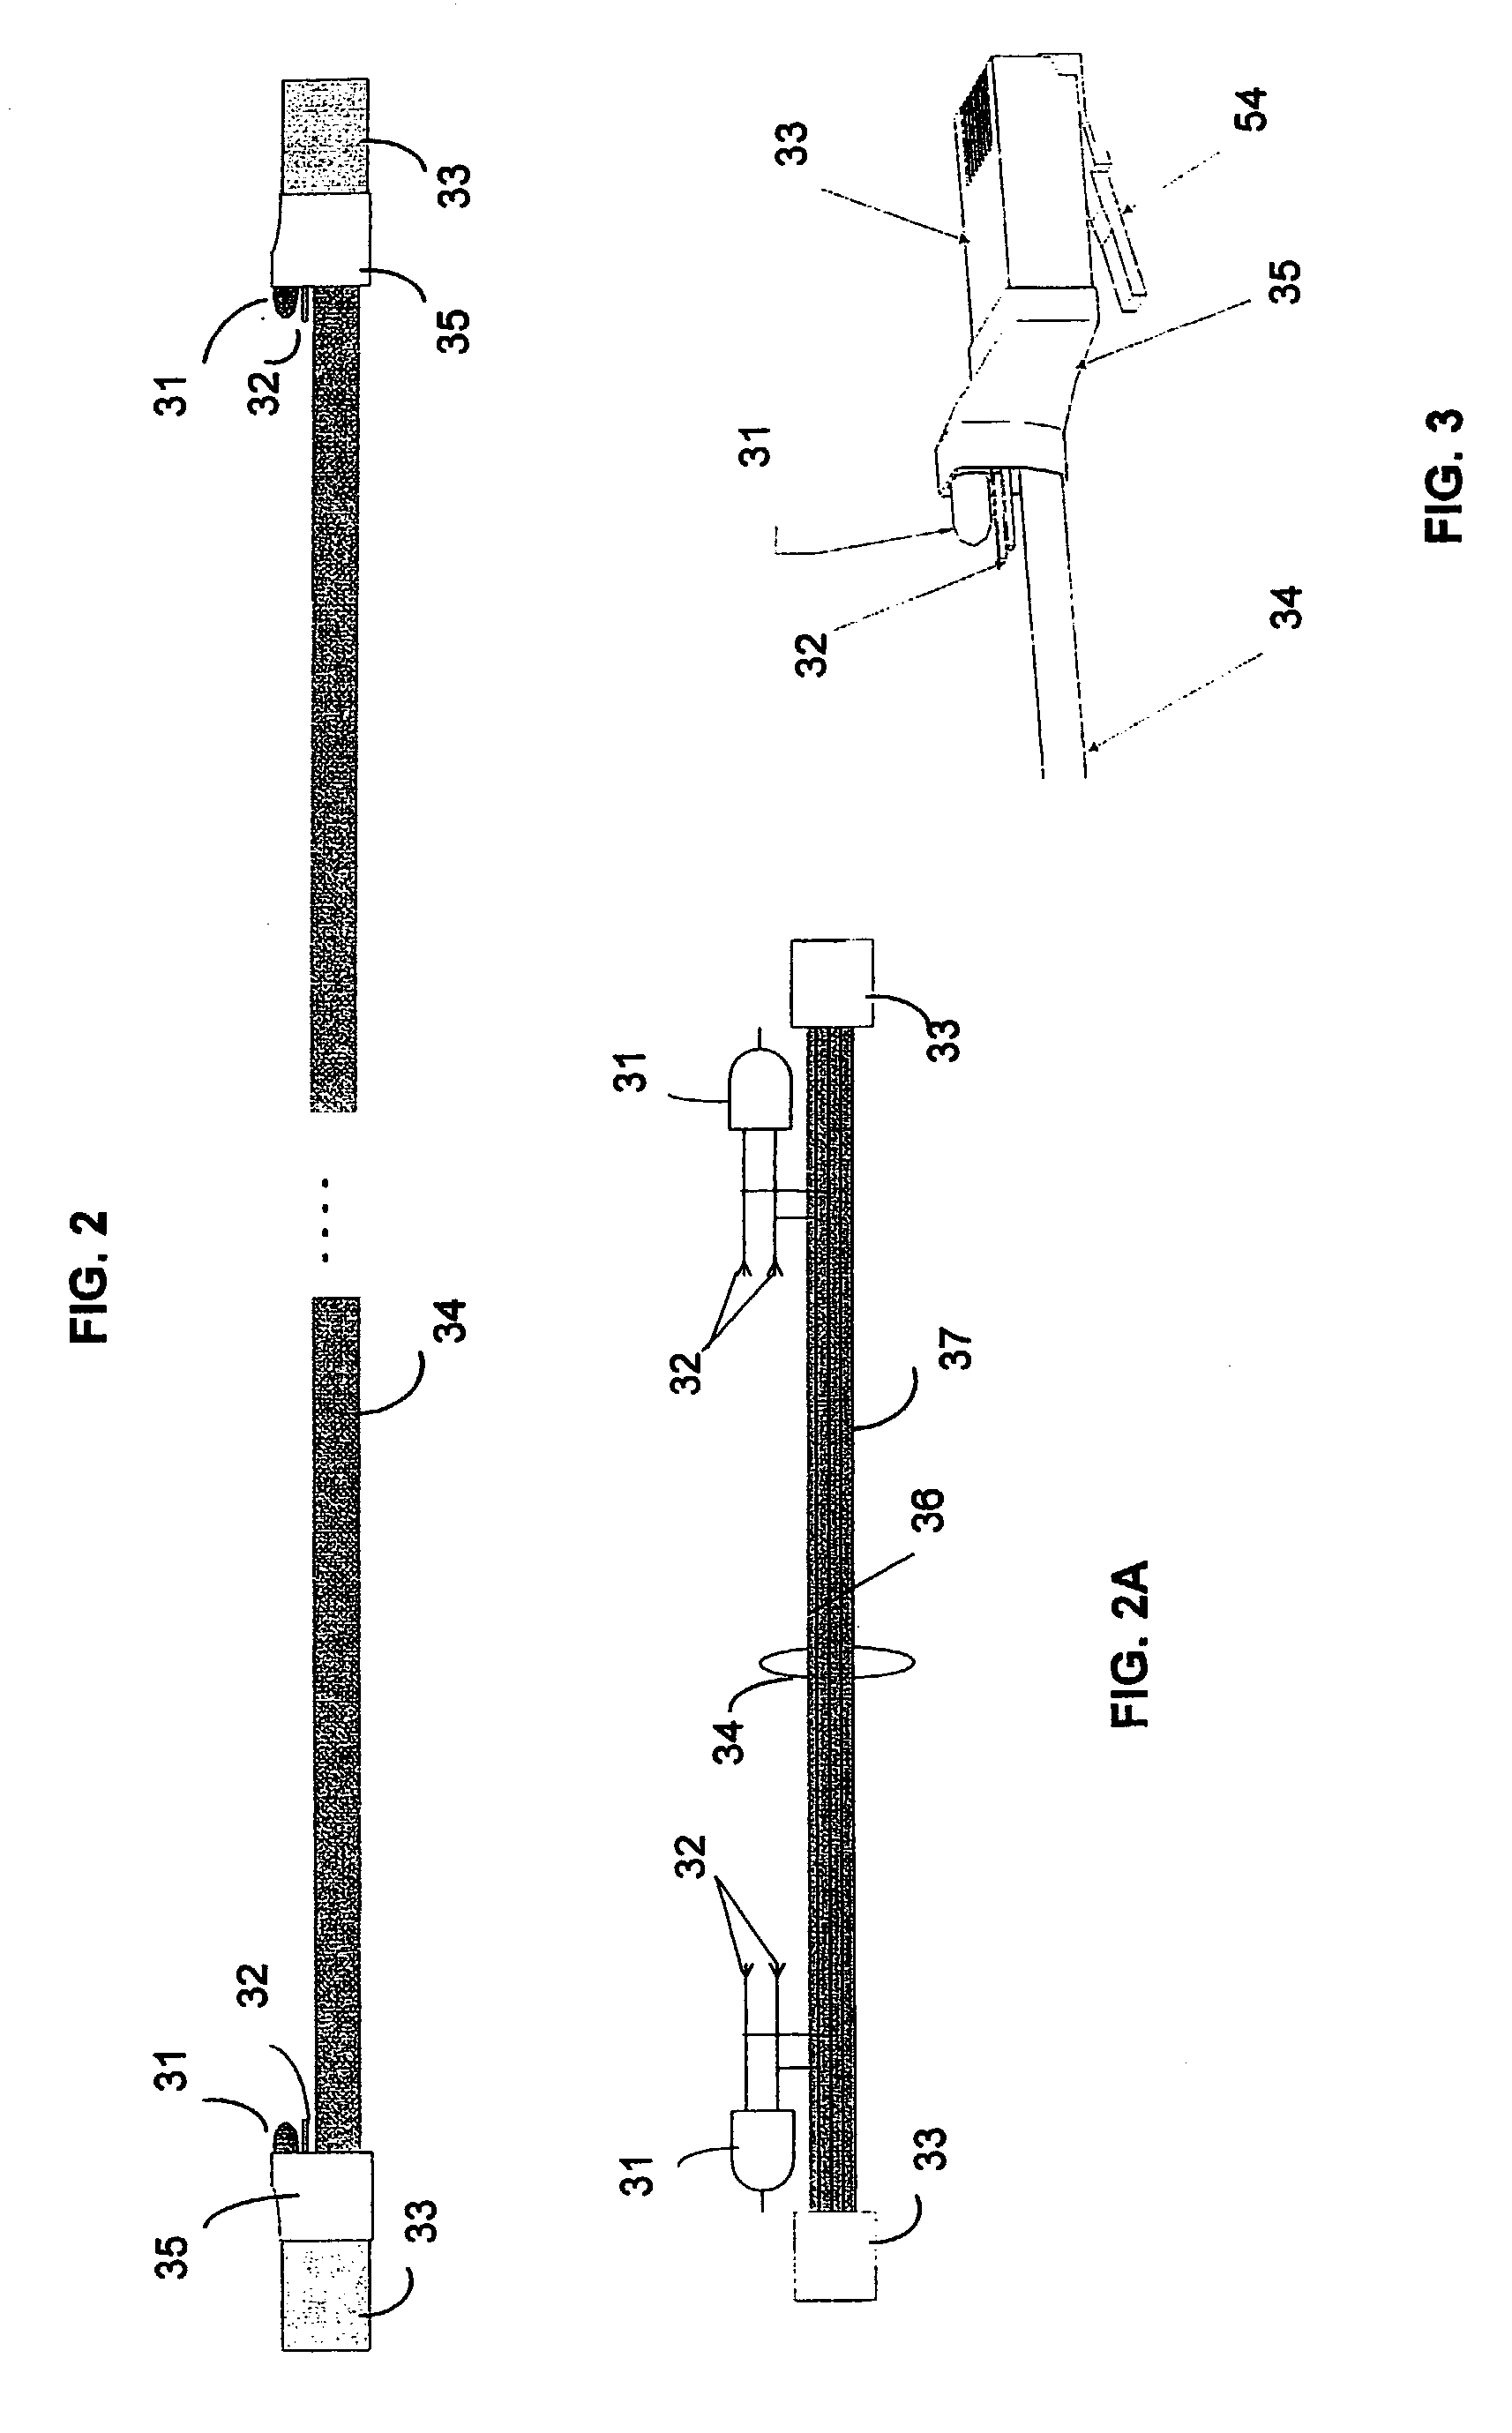 Method and apparatus for tracking remote ends of networking cables